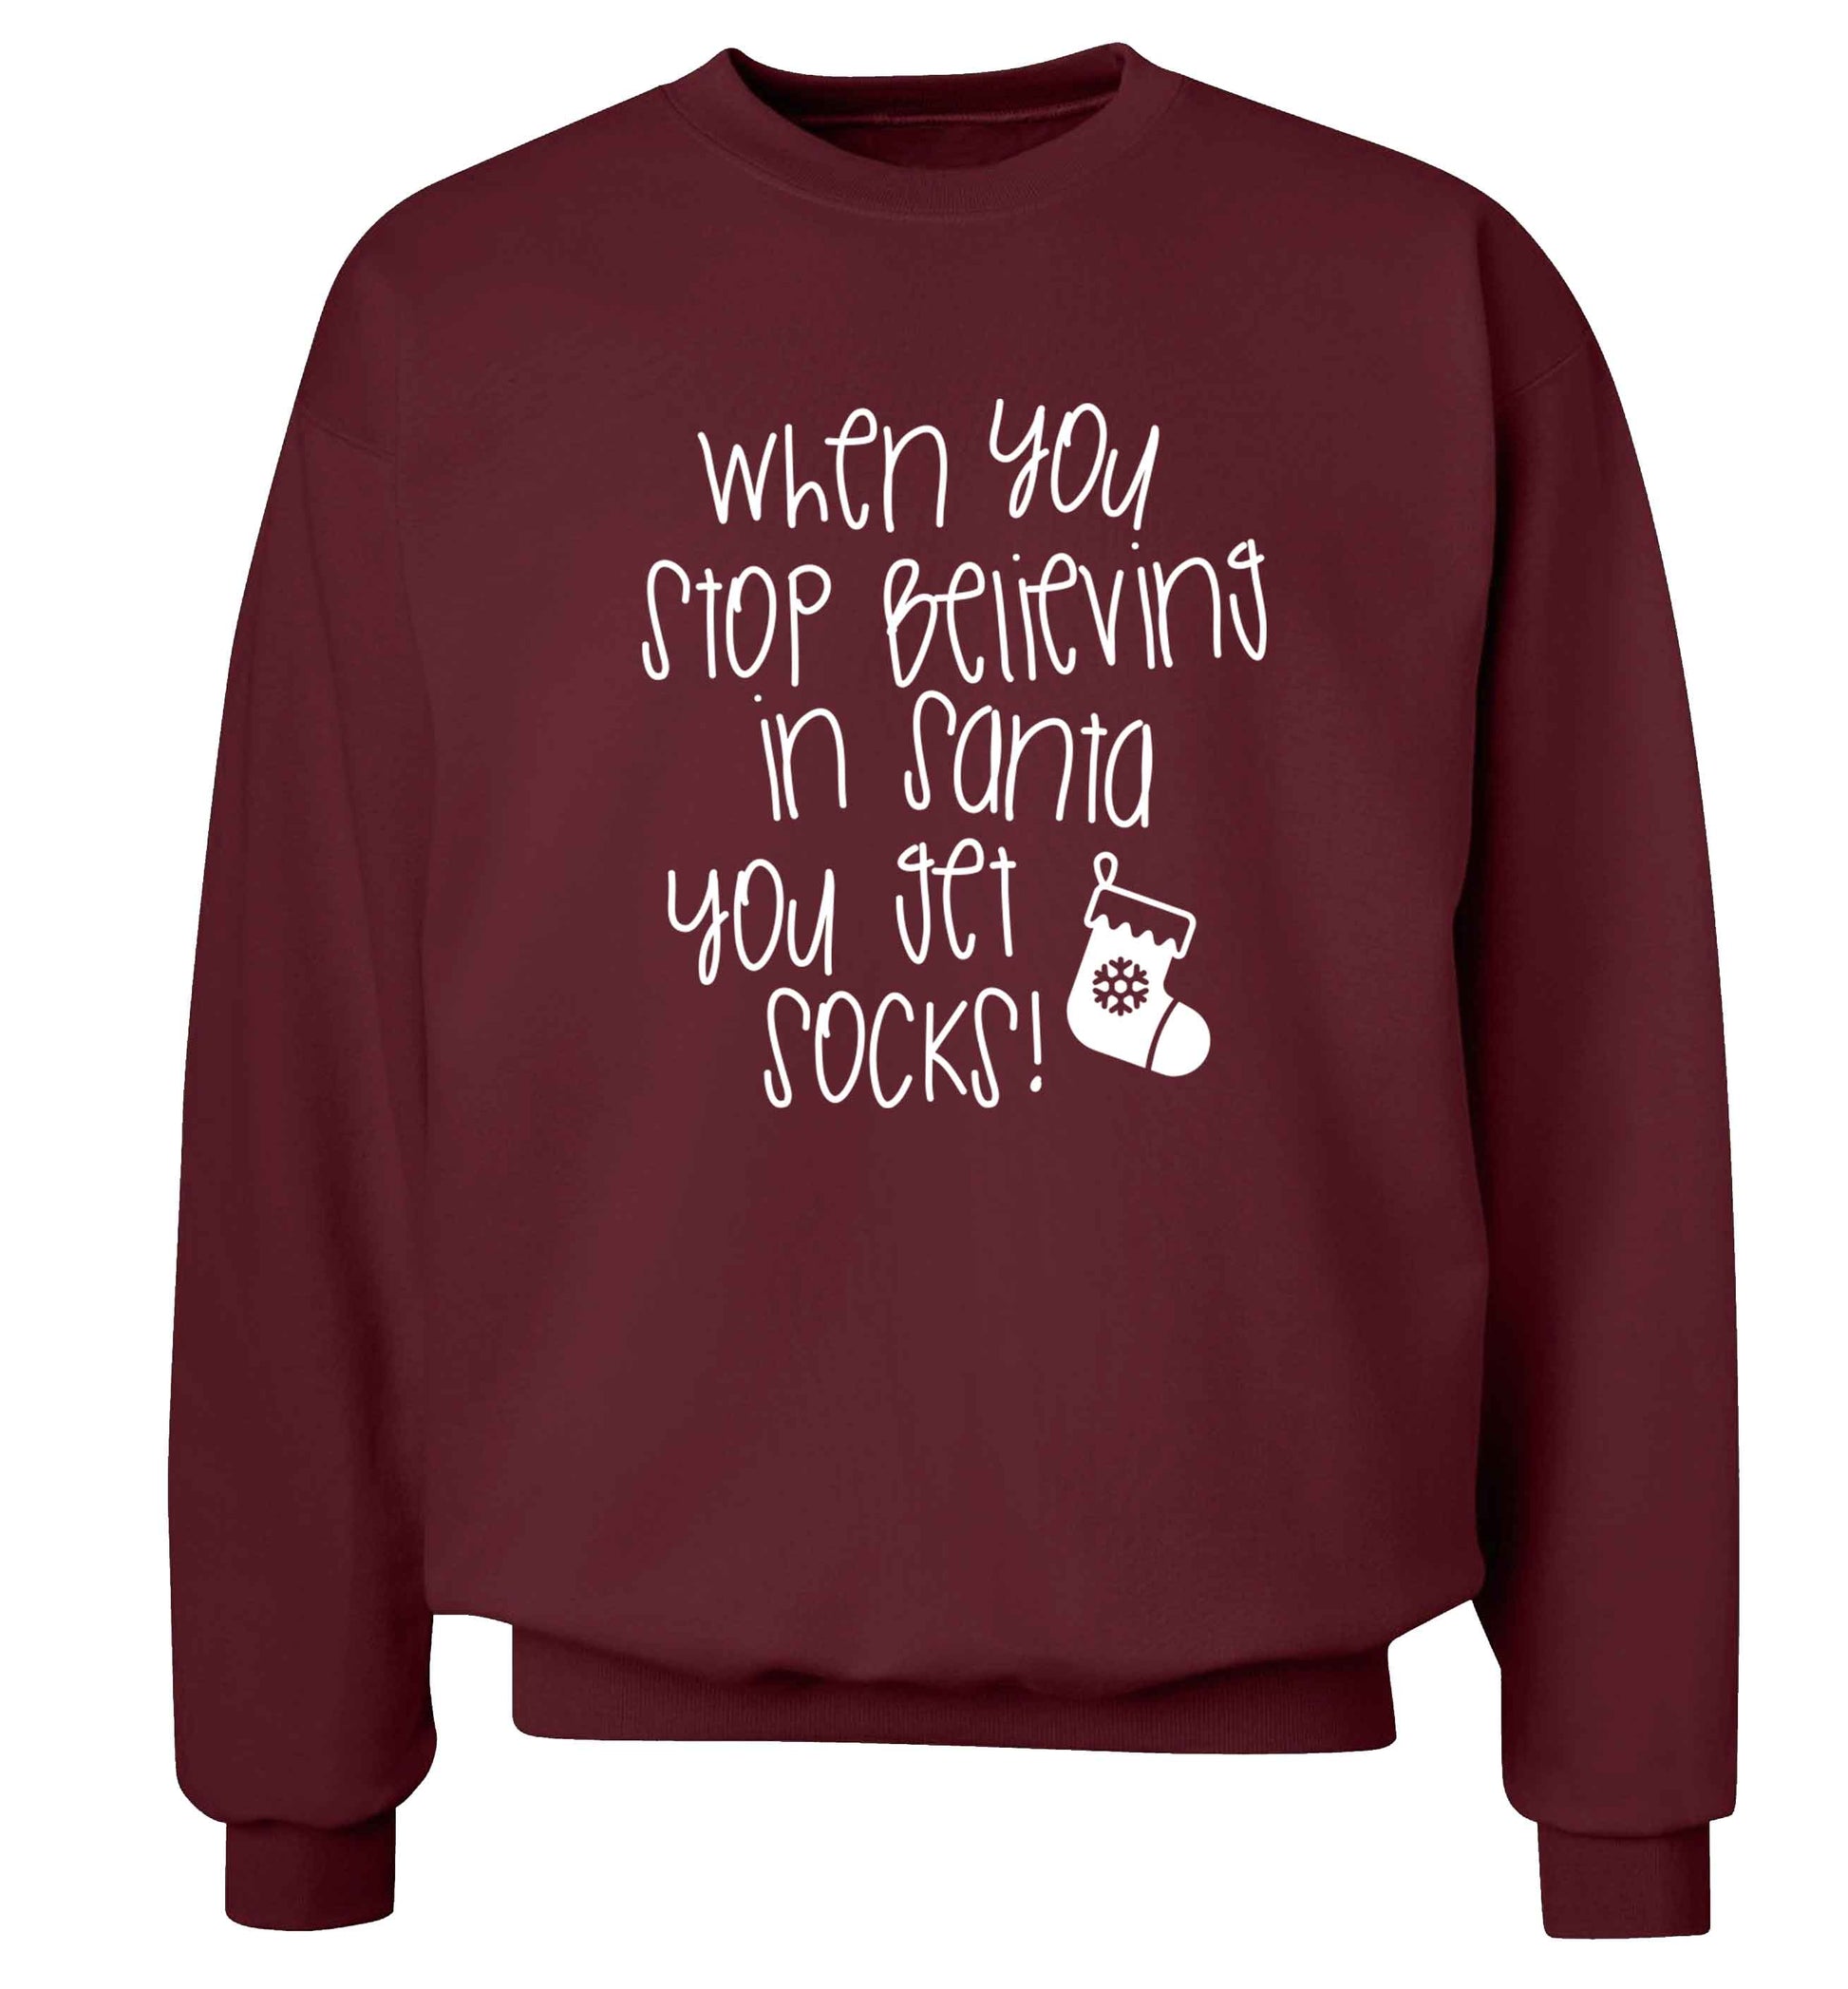 When you stop believing in santa you get socks Adult's unisex maroon Sweater 2XL